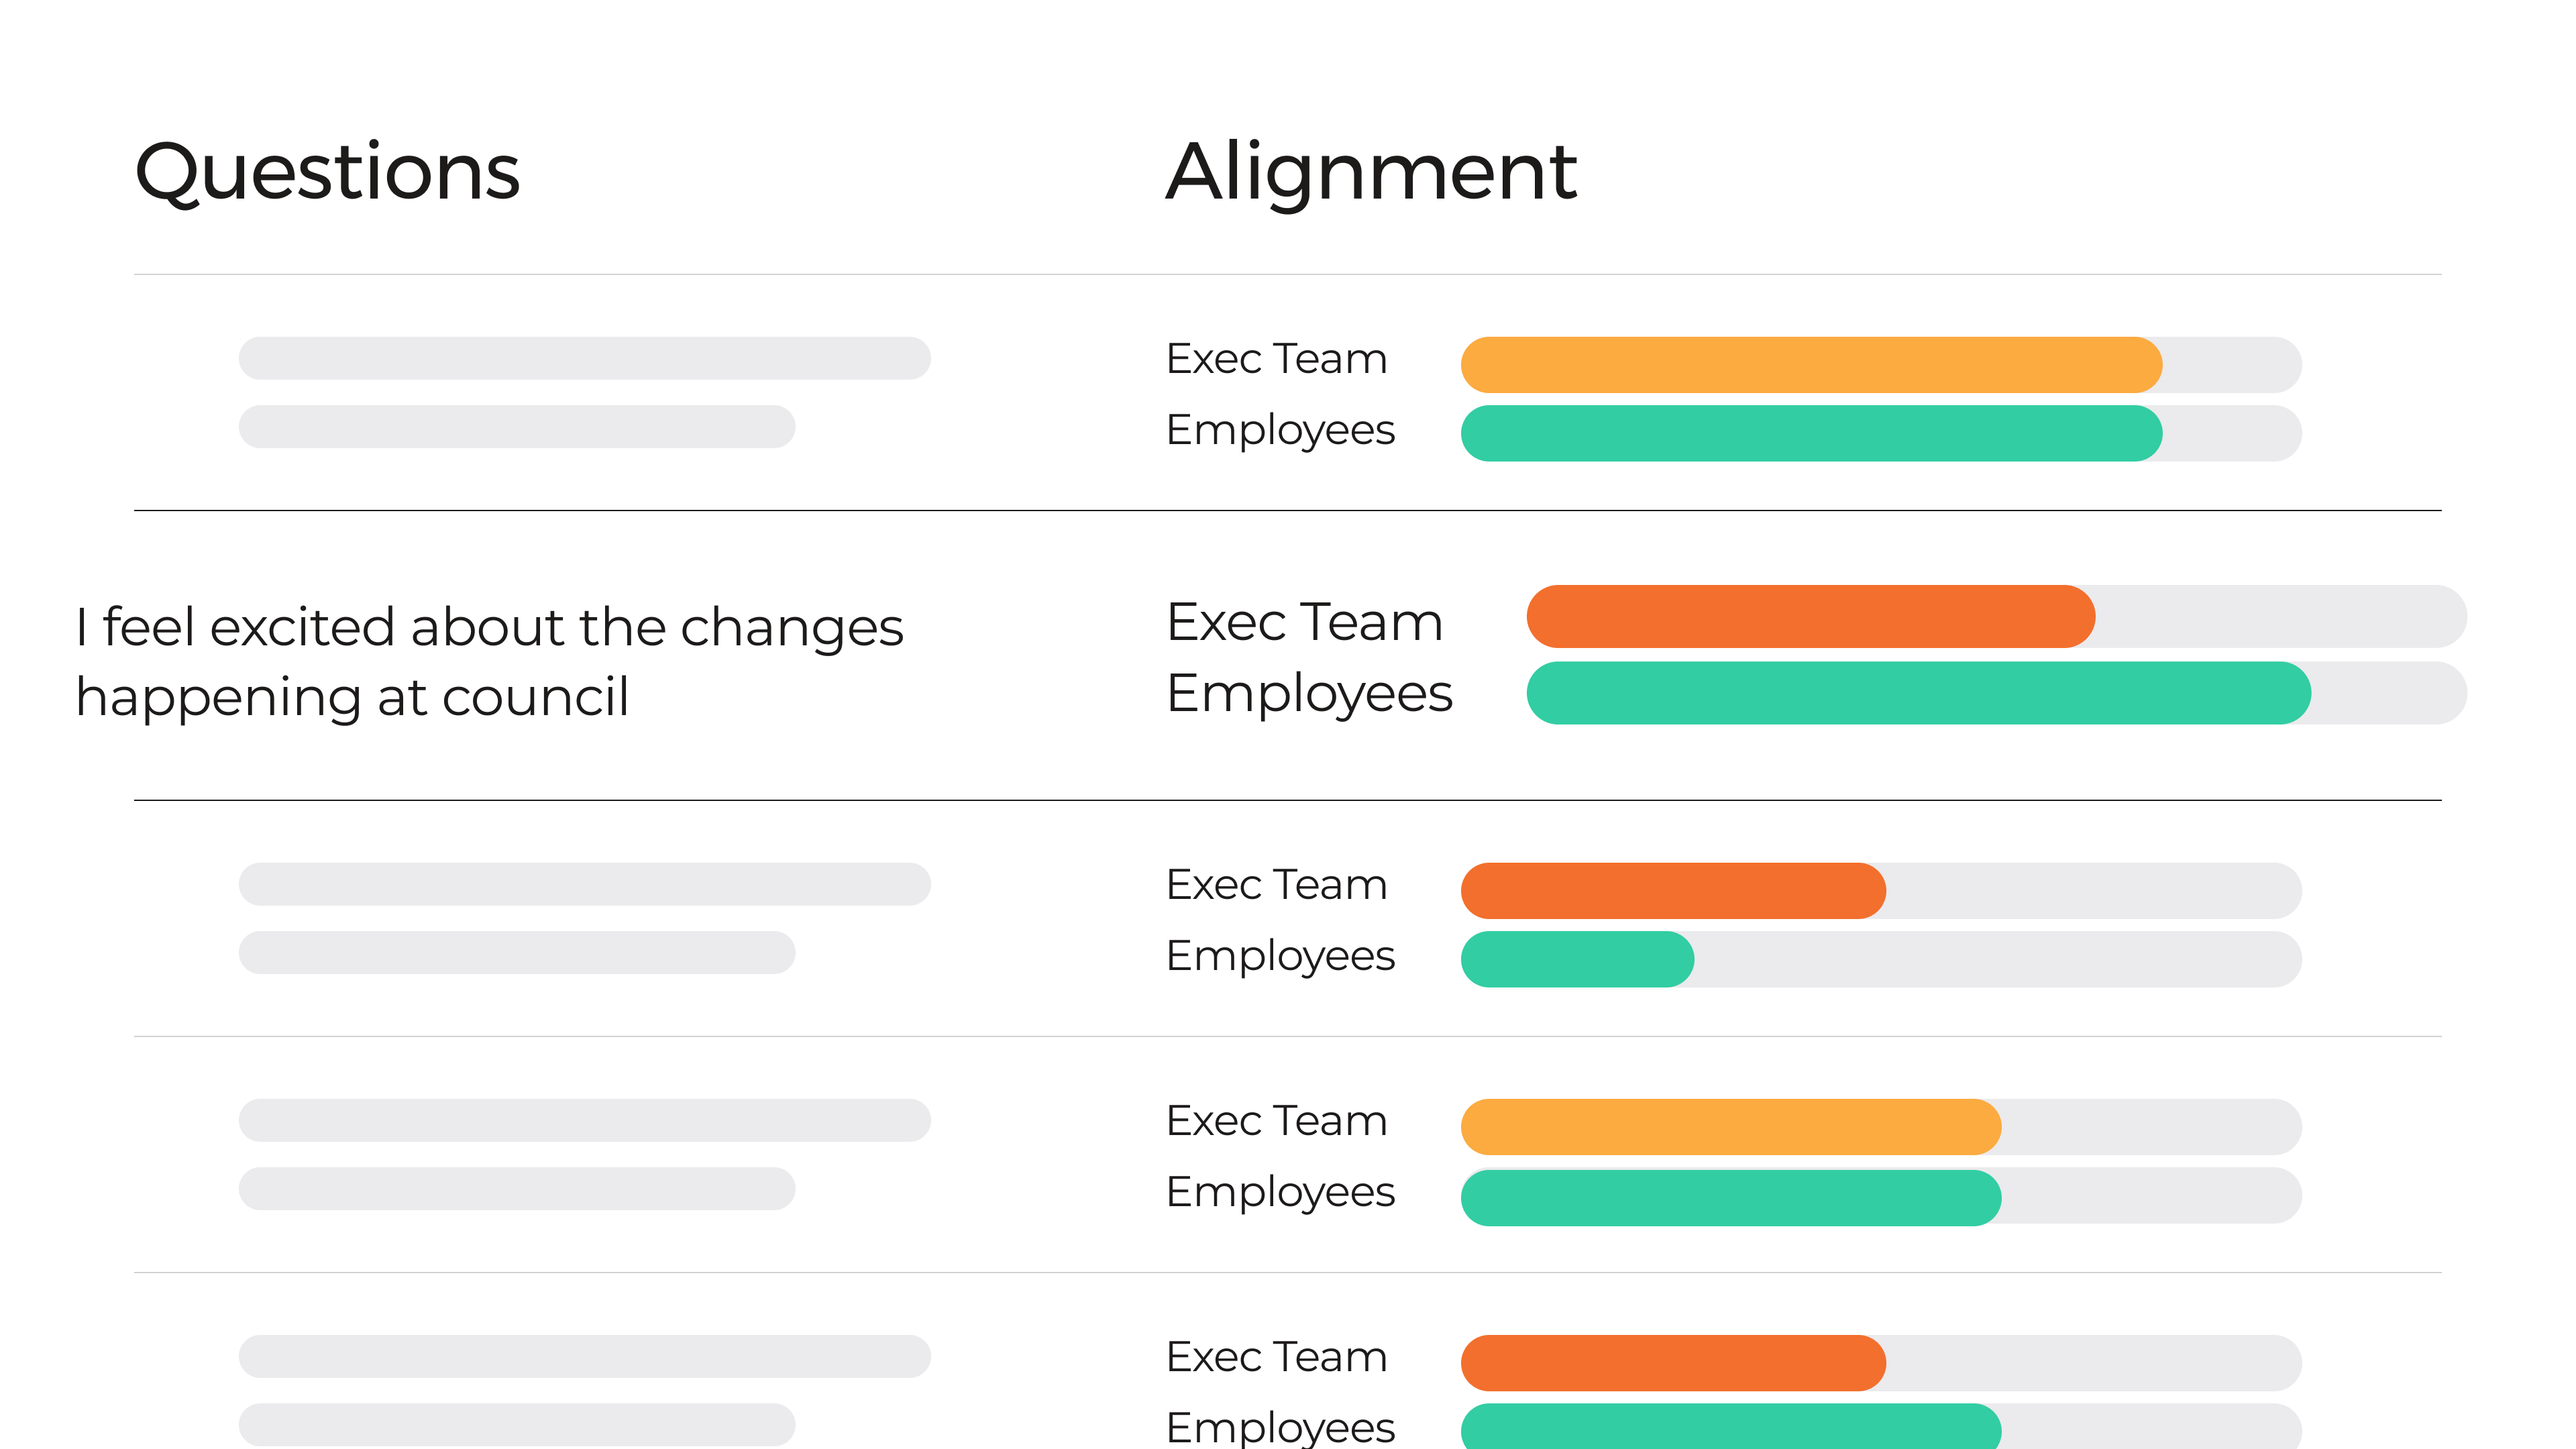 Compare employee feedback with your Exec Team